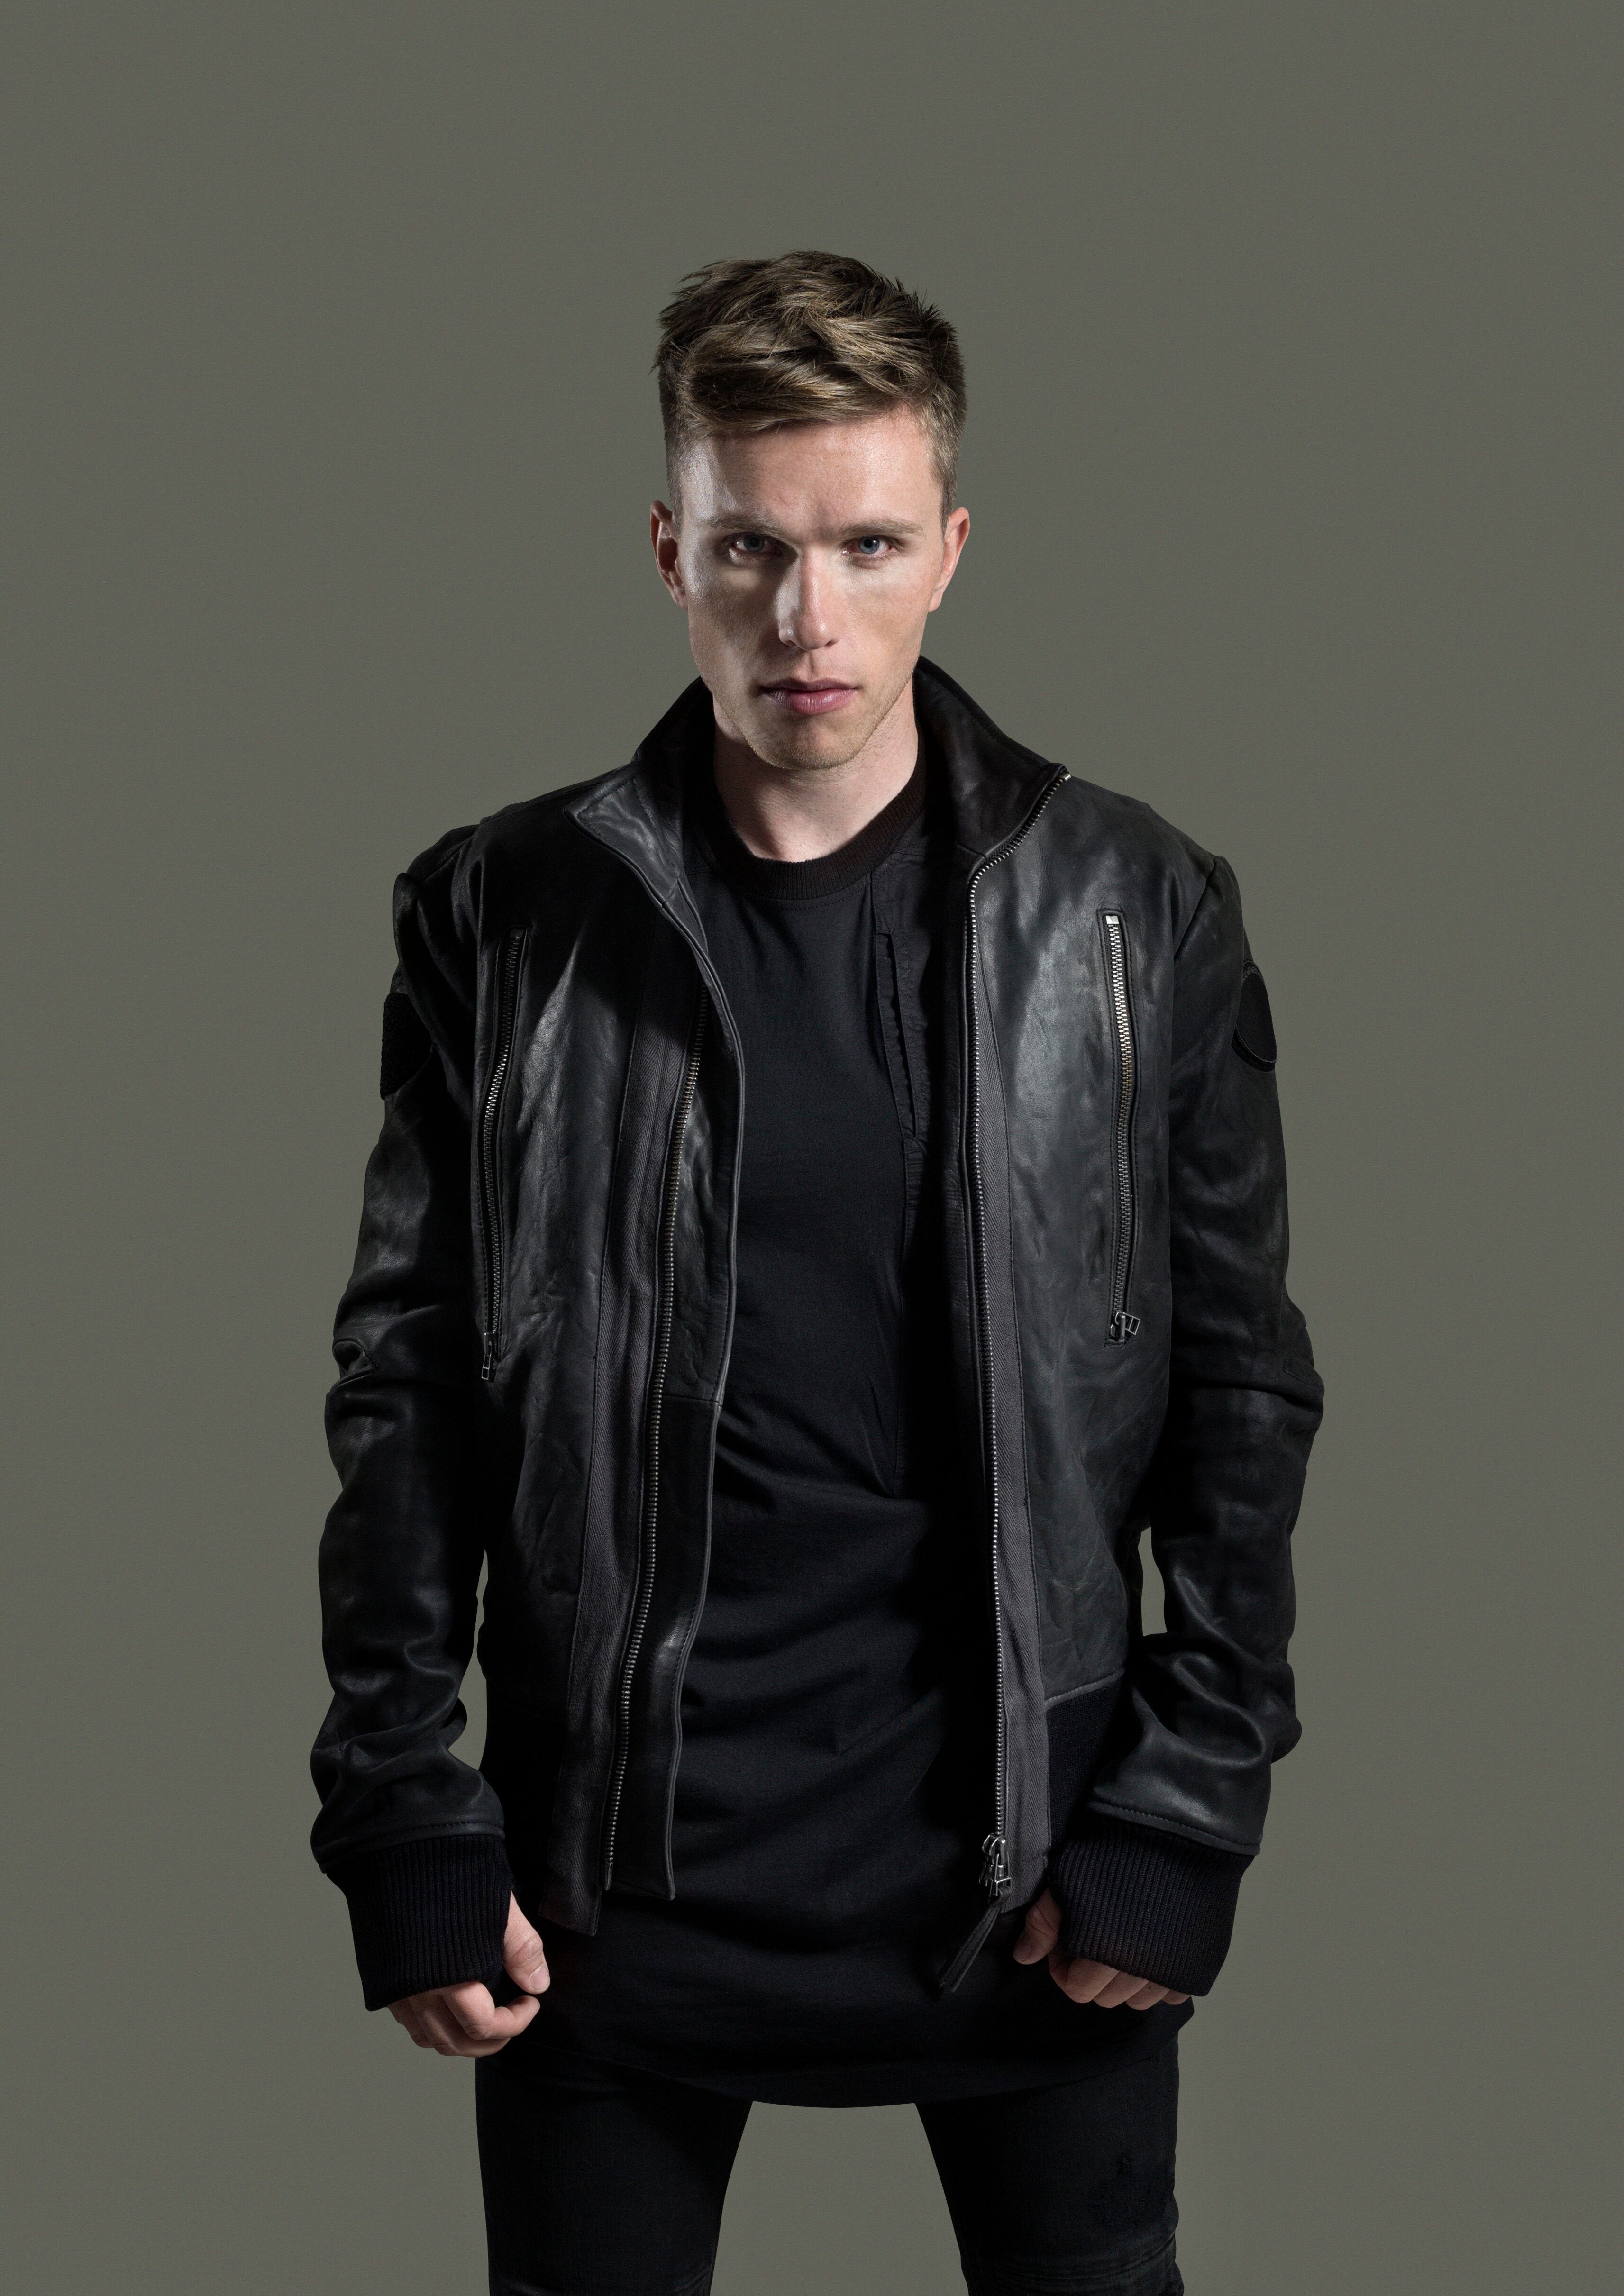 Nicky Romero Releases Protocol’s Five-Year Celebration EP.